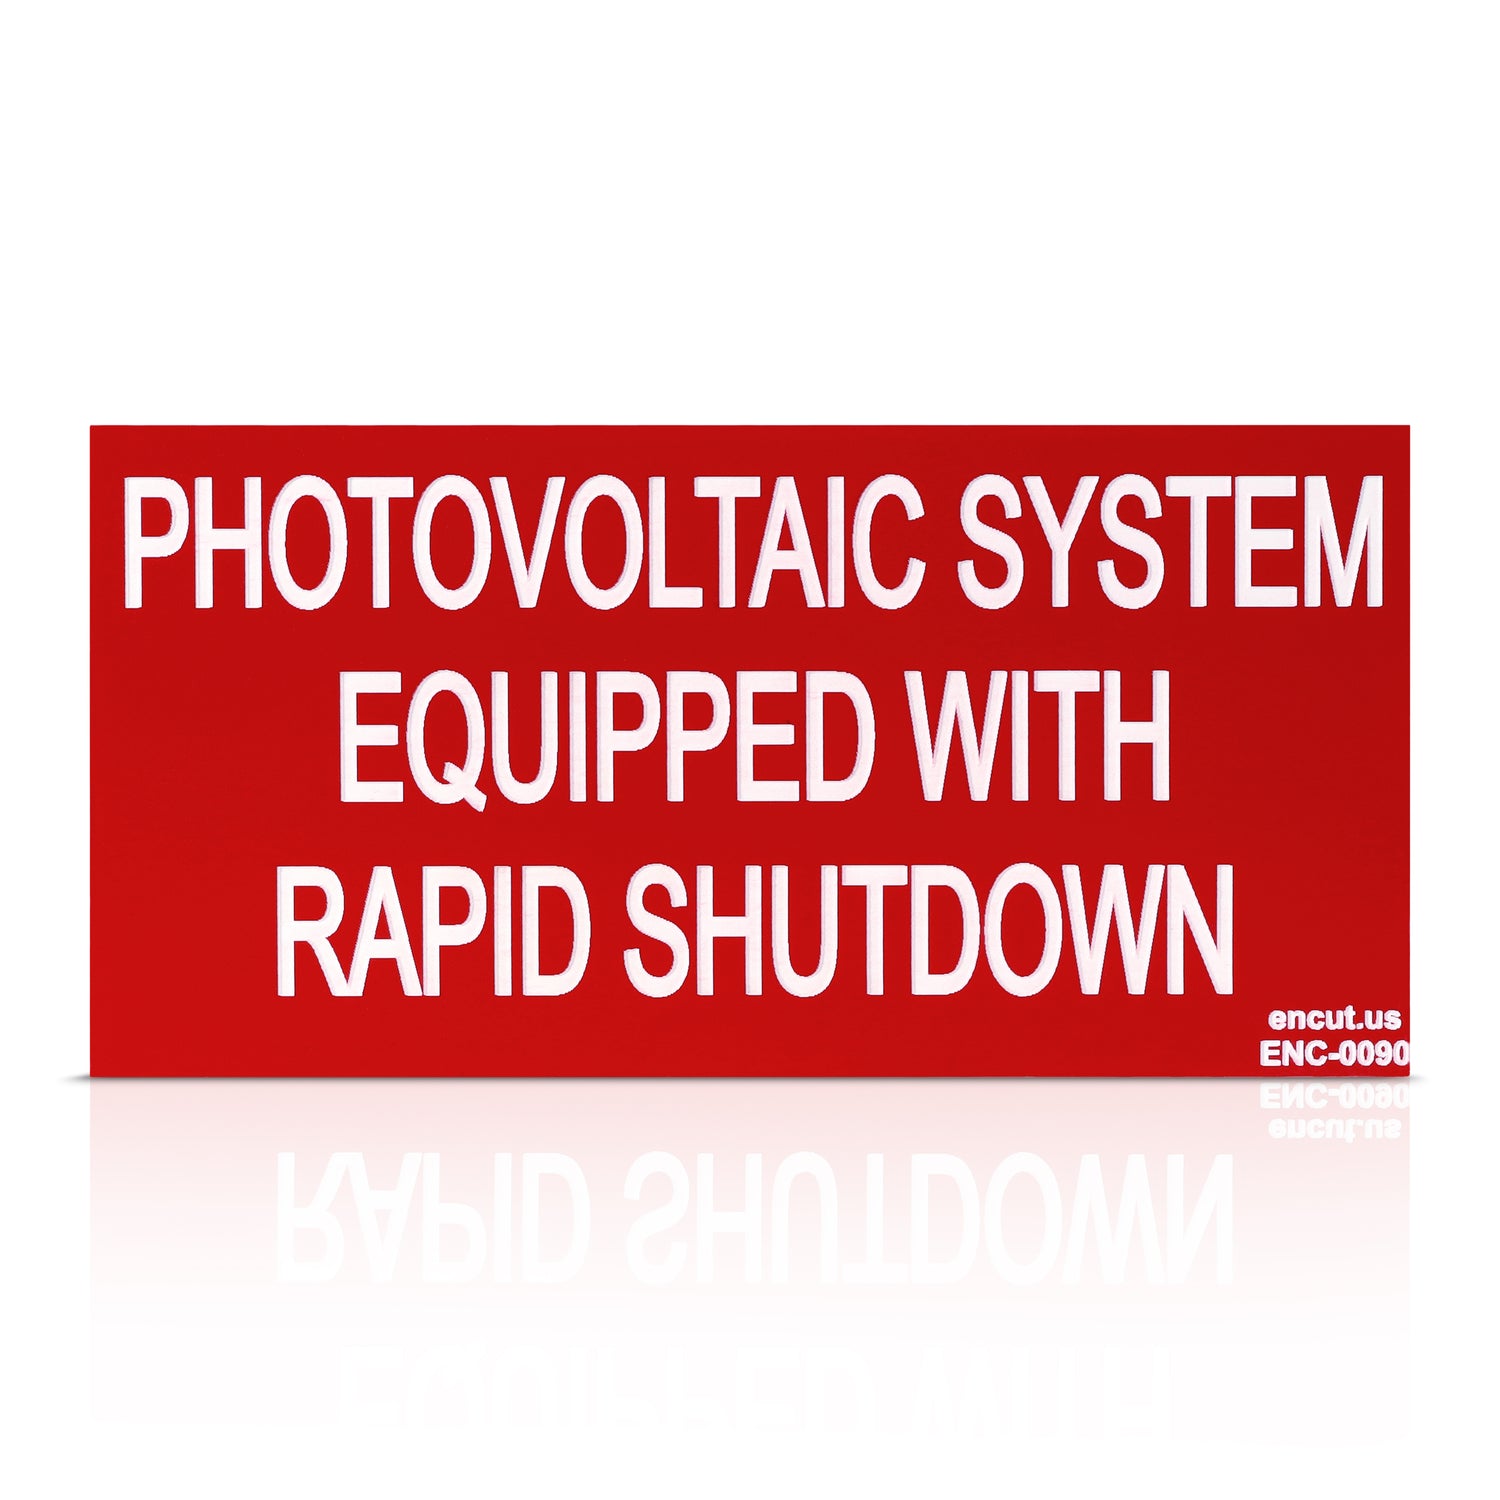 Photovoltaic System Equipped With Rapid Shutdown Placard